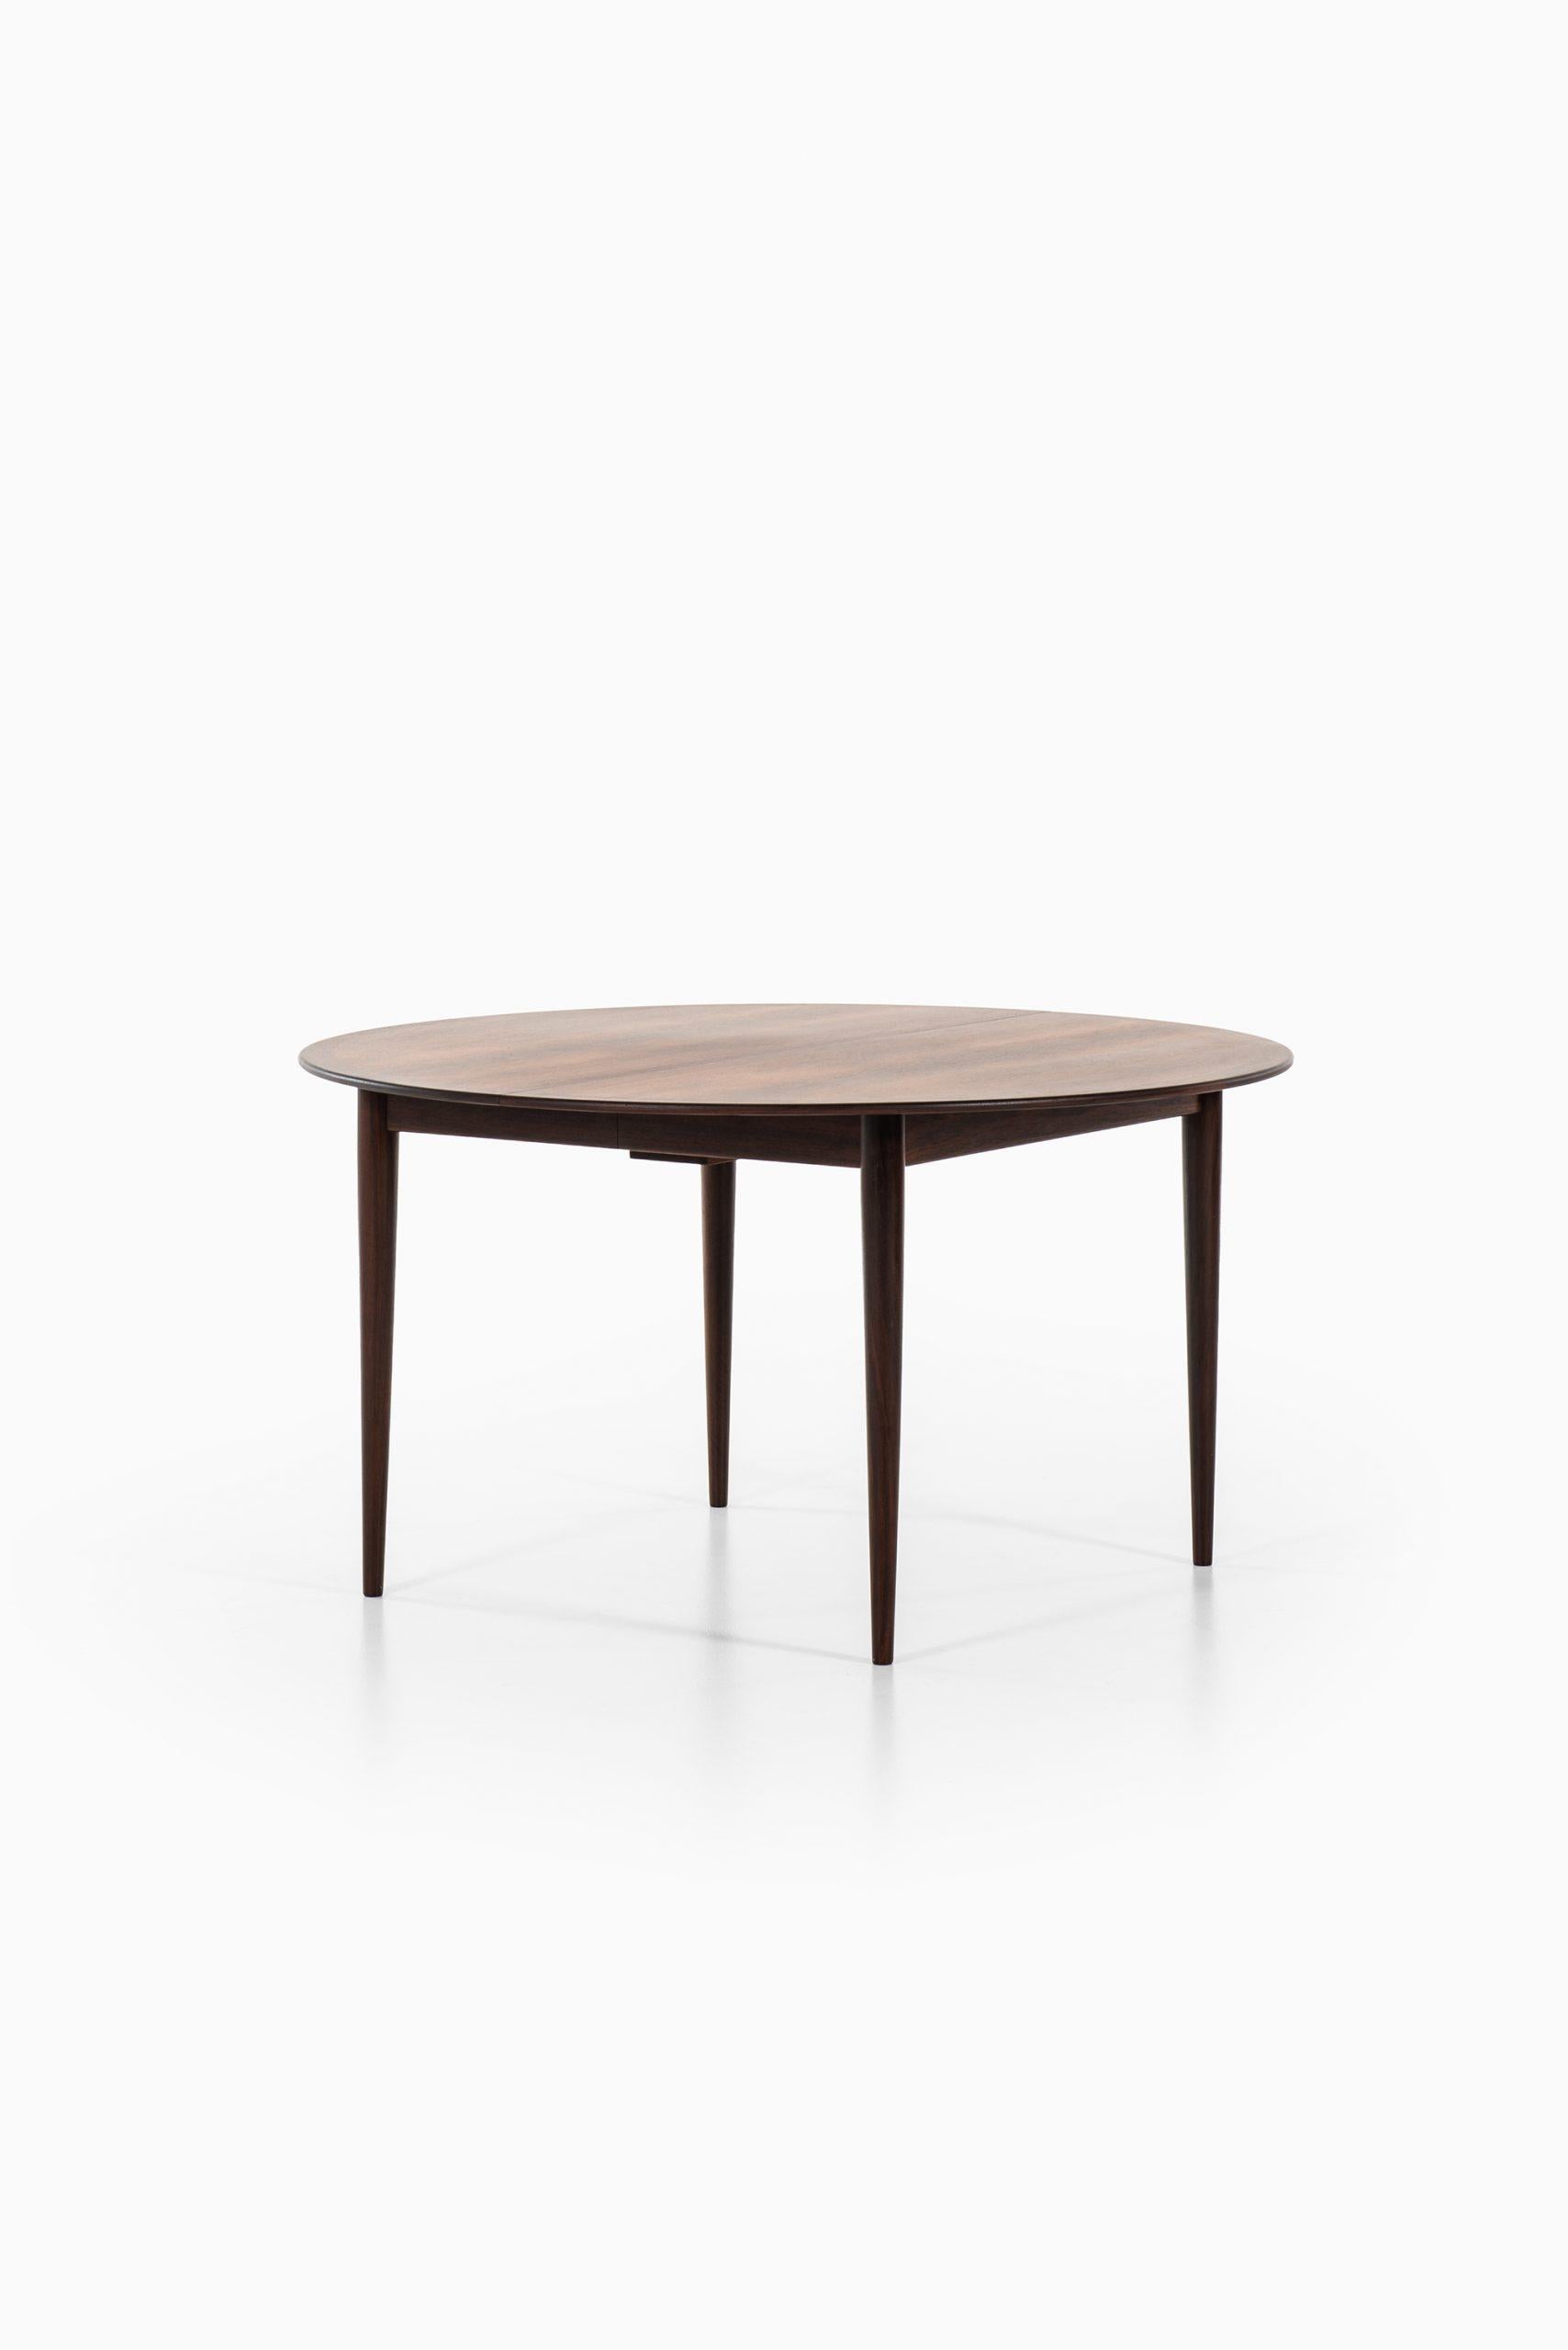 Mid-20th Century Grete Jalk Dining Table Produced by P. Jeppesens Møbelfabrik in Denmark For Sale